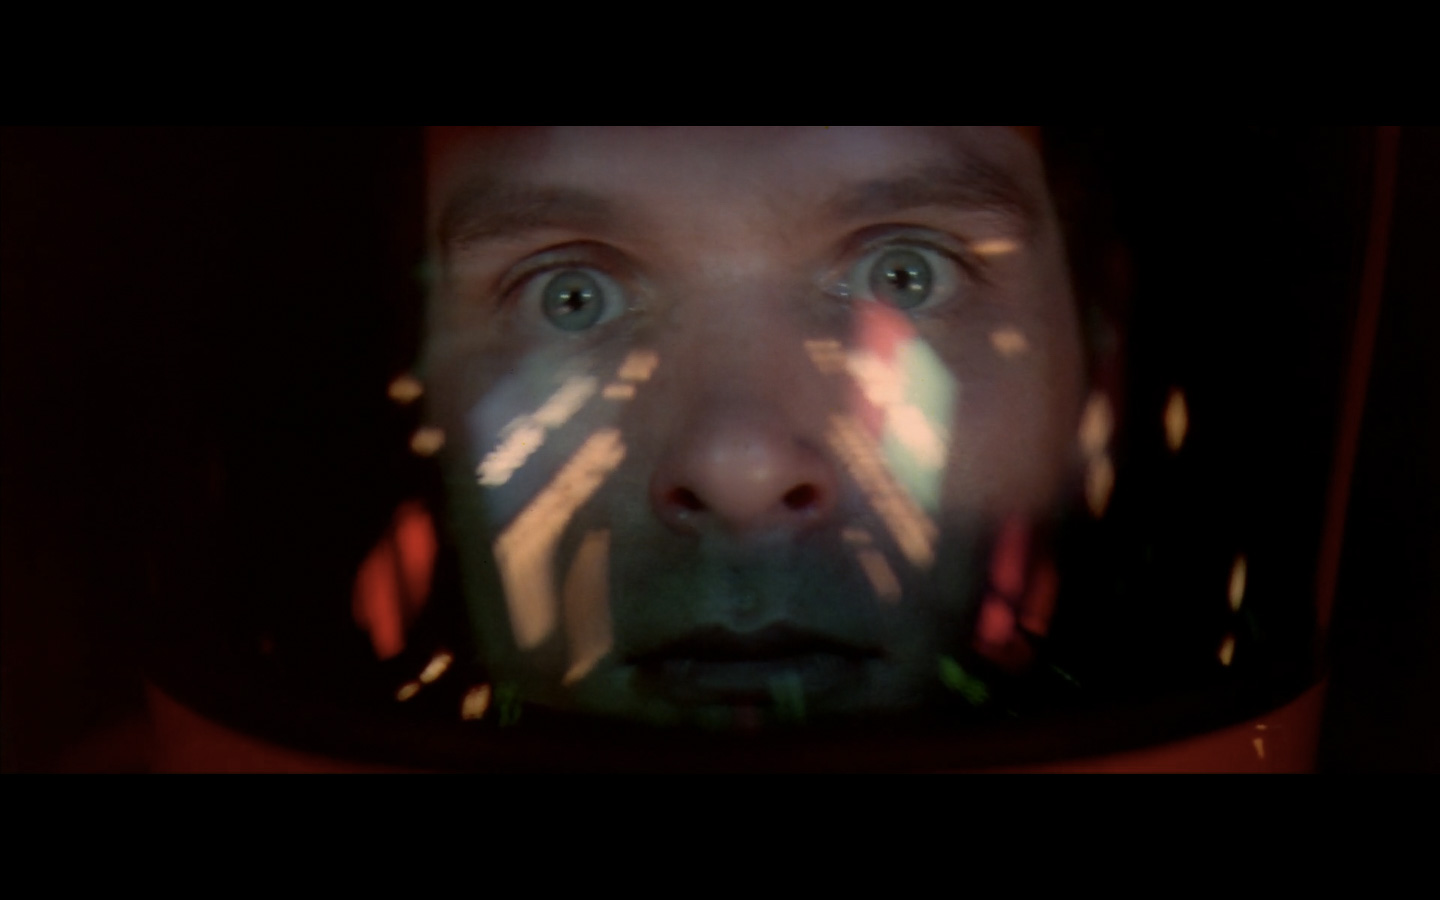 Part 1: Epic Cinematography and Philosophy of 2001 Space Odyssey by Stanley Kubrick